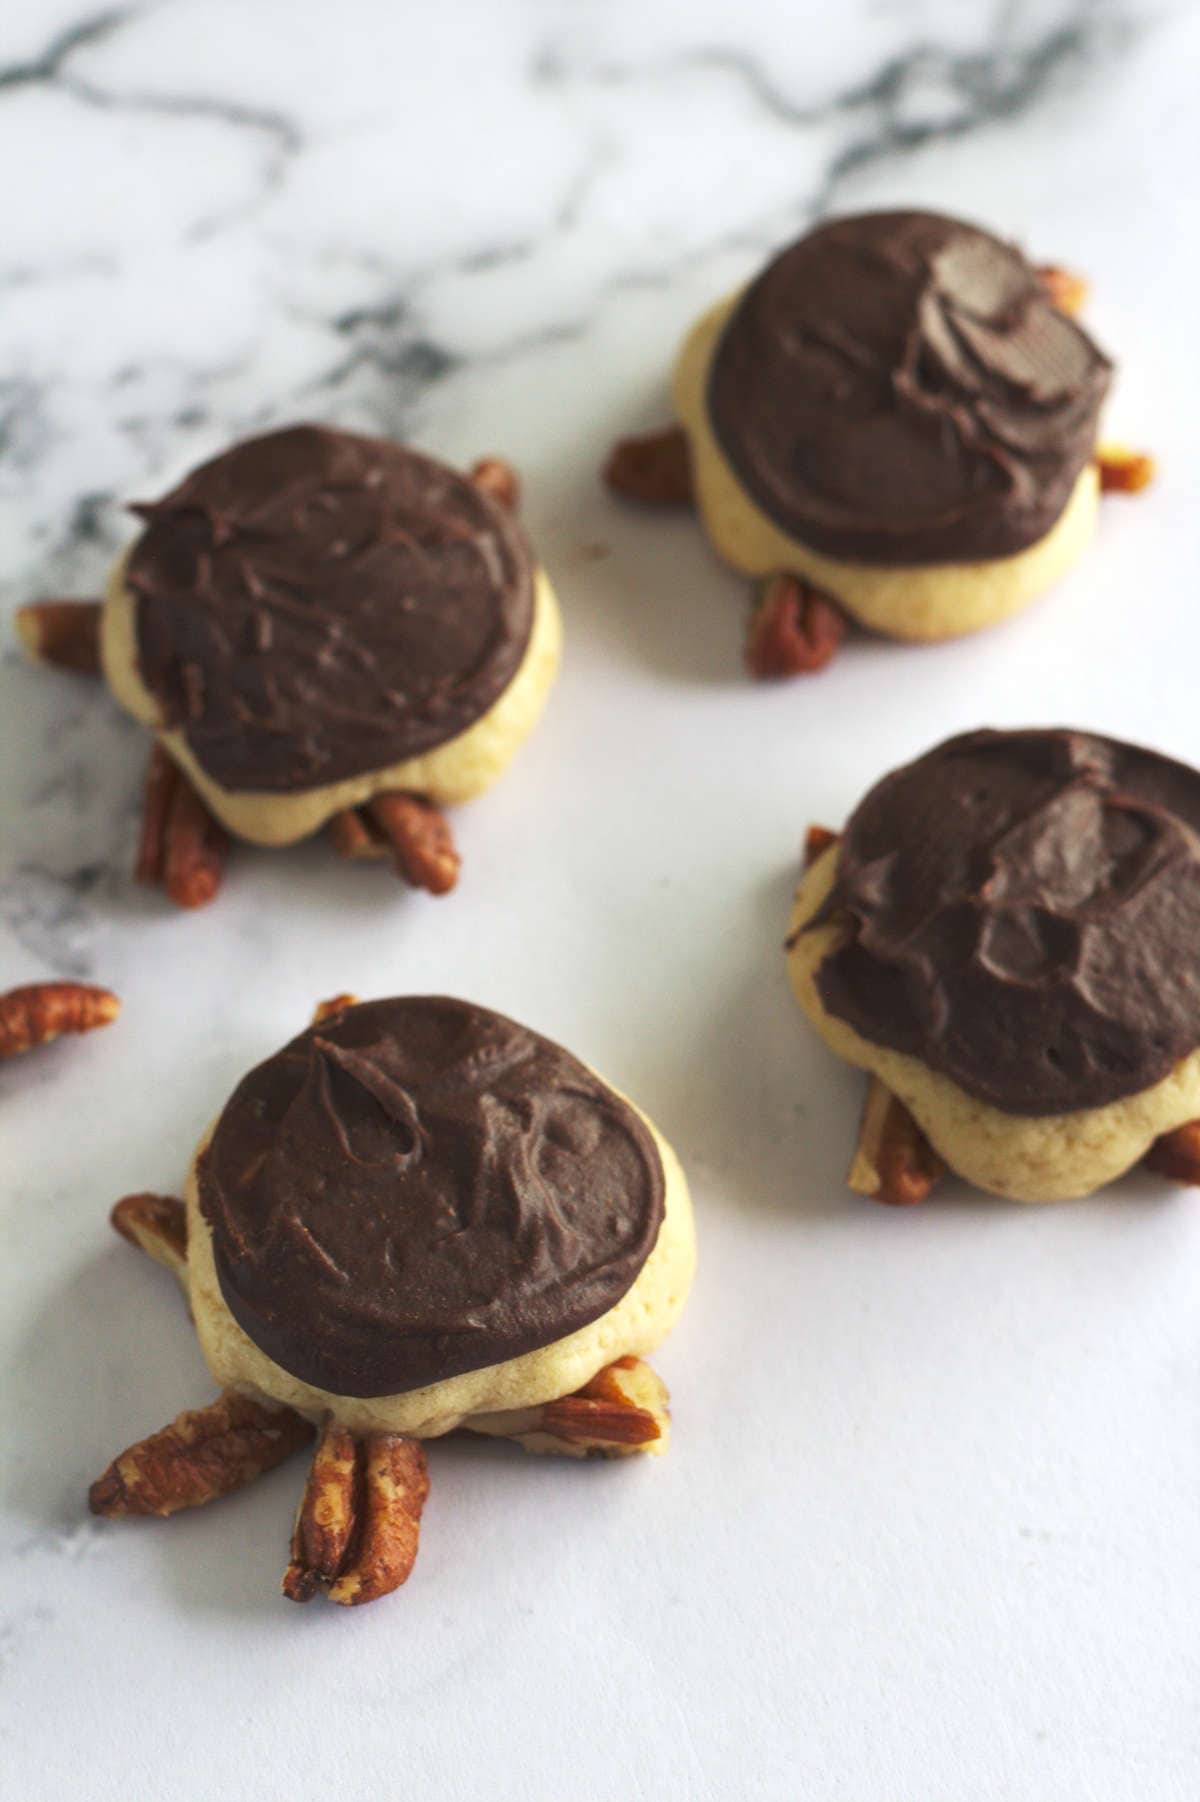 Four turtle cookies with chocolate frosted tops.